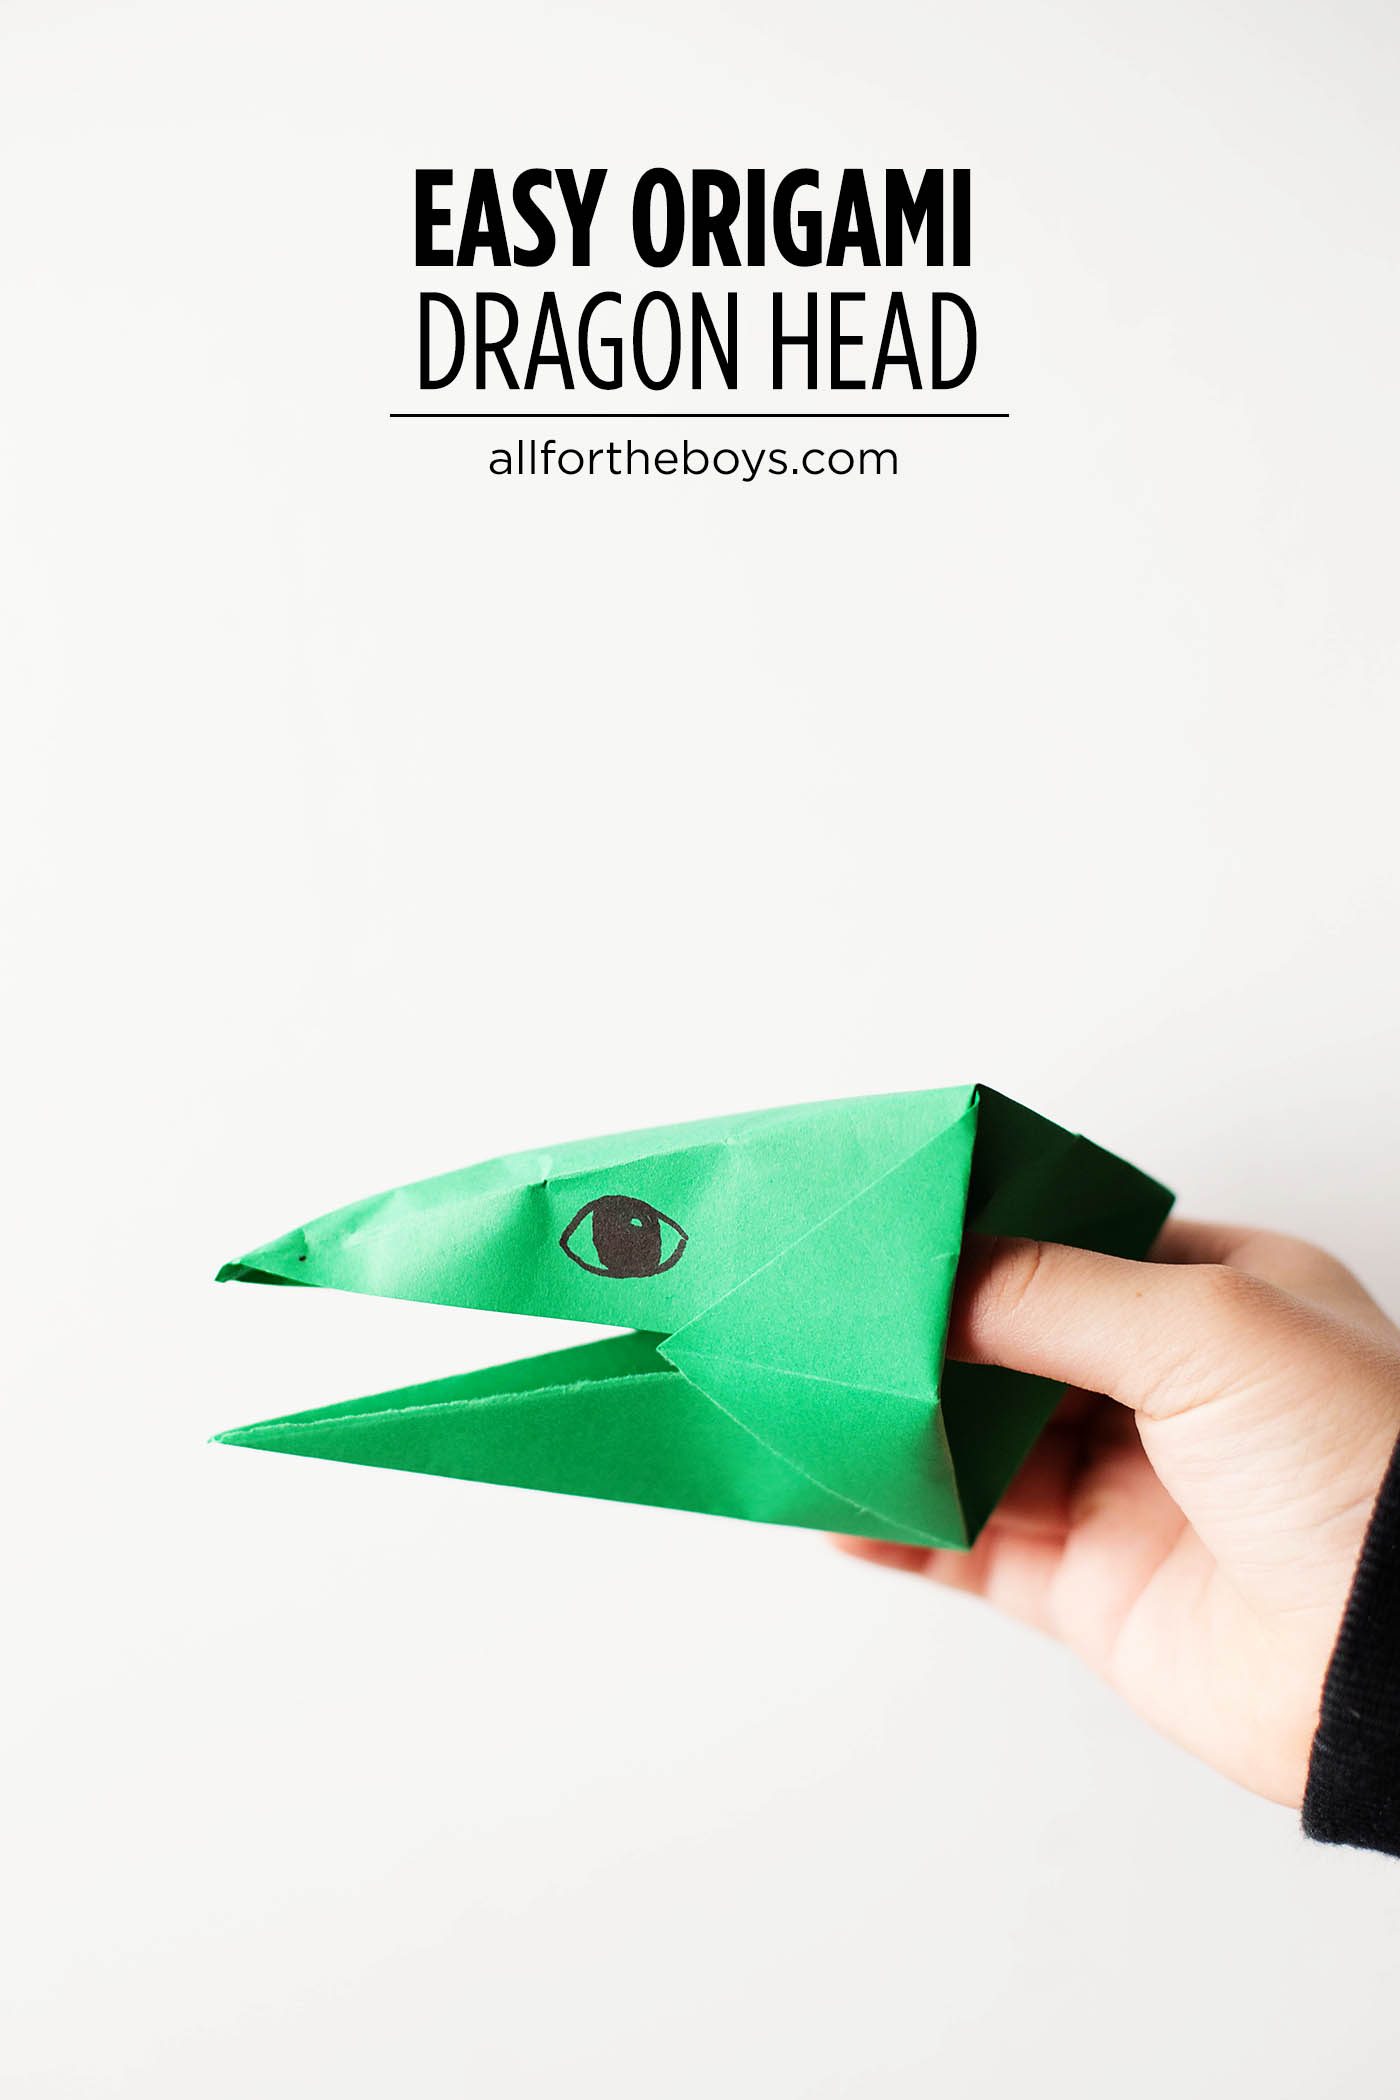 Origami Dragon Head Aftb Origami Dragon Head 2 All For The Boys